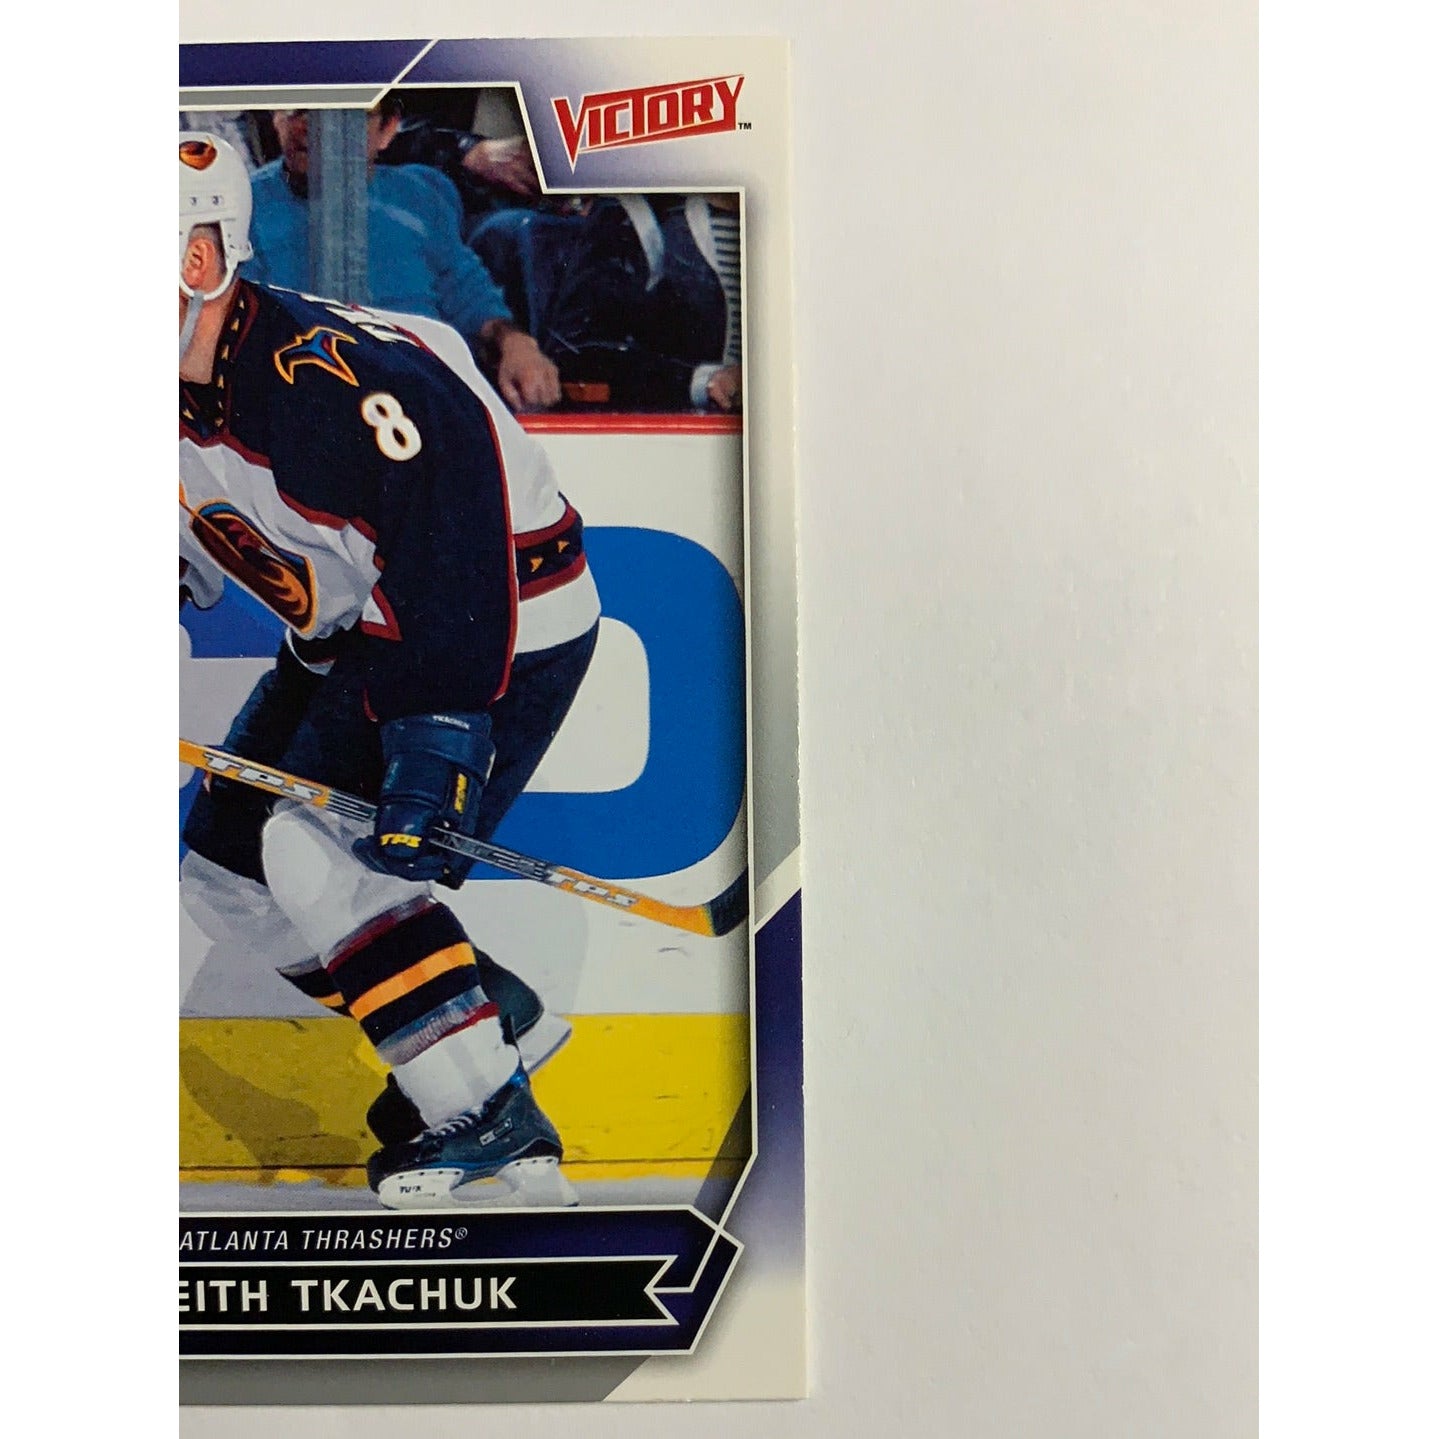  2007-08 Victory Keith Tkachuk  Local Legends Cards & Collectibles